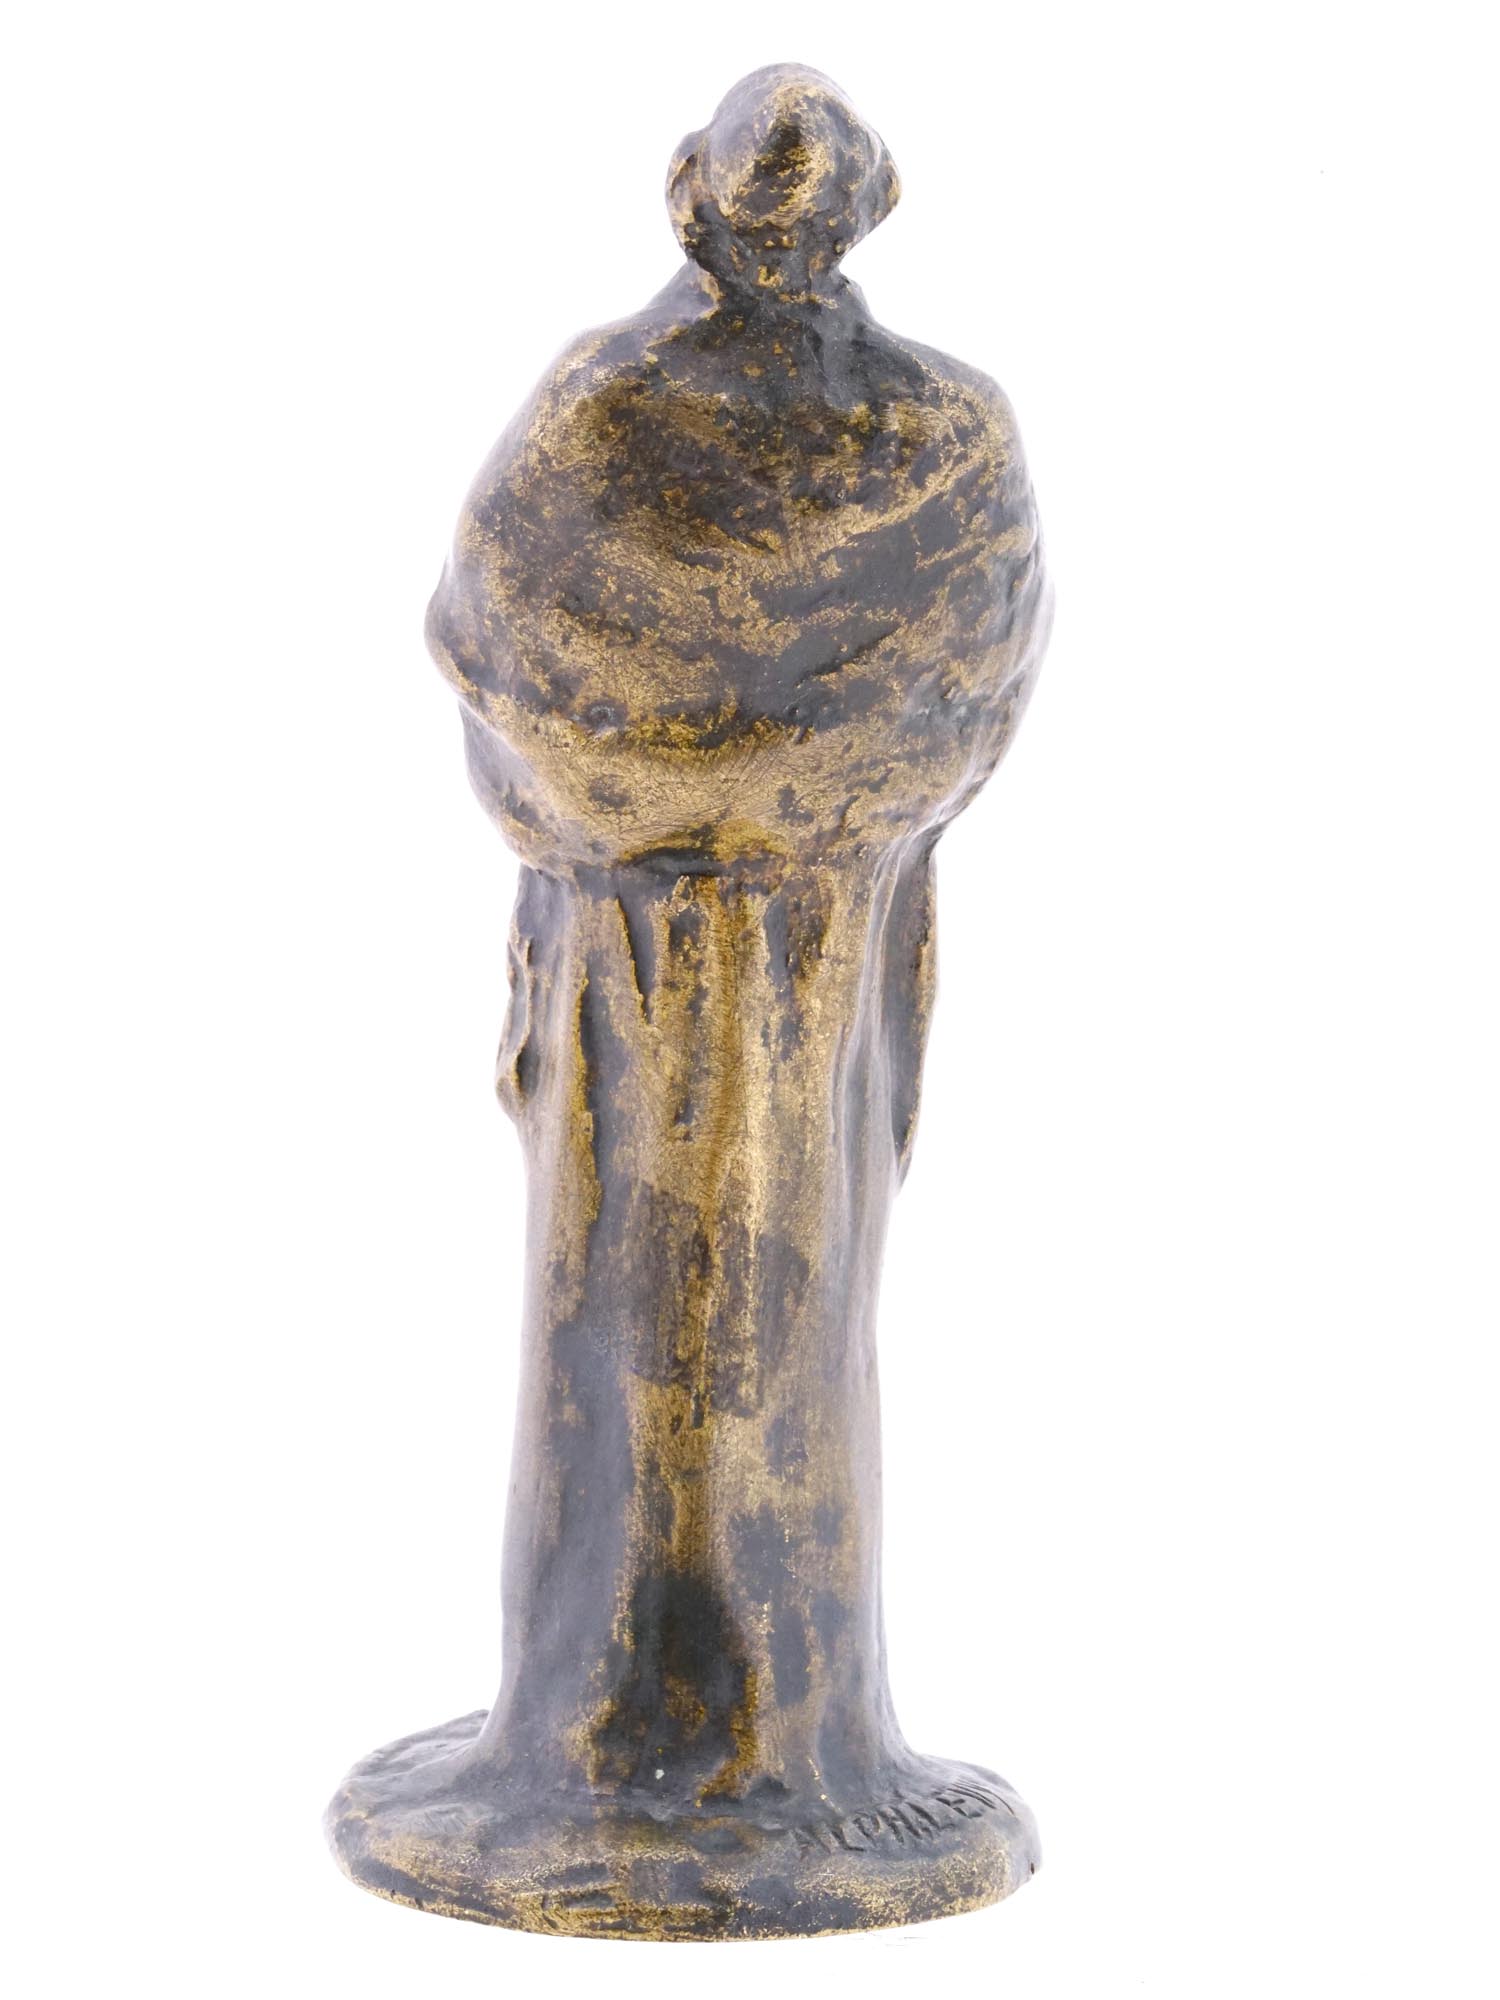 JUDAICA FRENCH BRONZE SCULPTURE BY ALPHONSE LEVY PIC-3